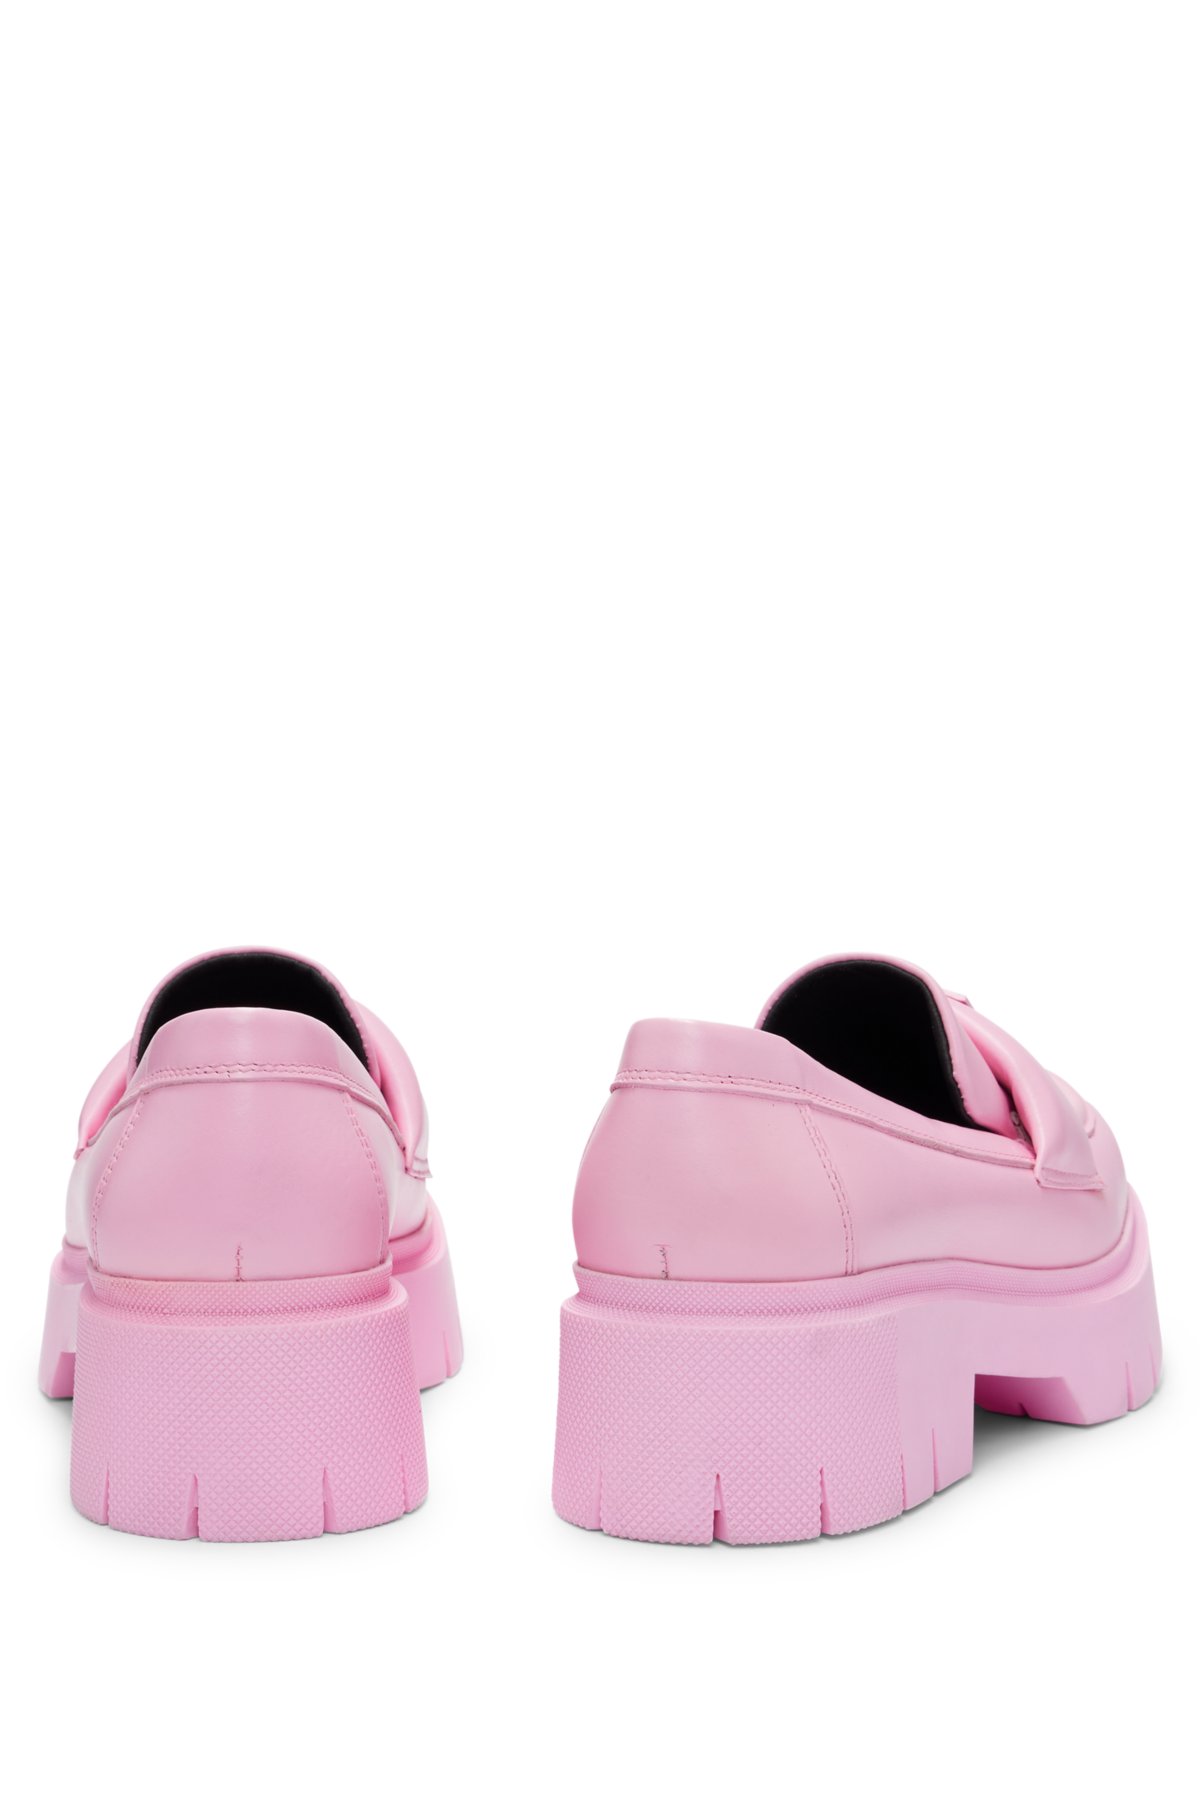 Leather loafers with platform sole and branded strap, light pink